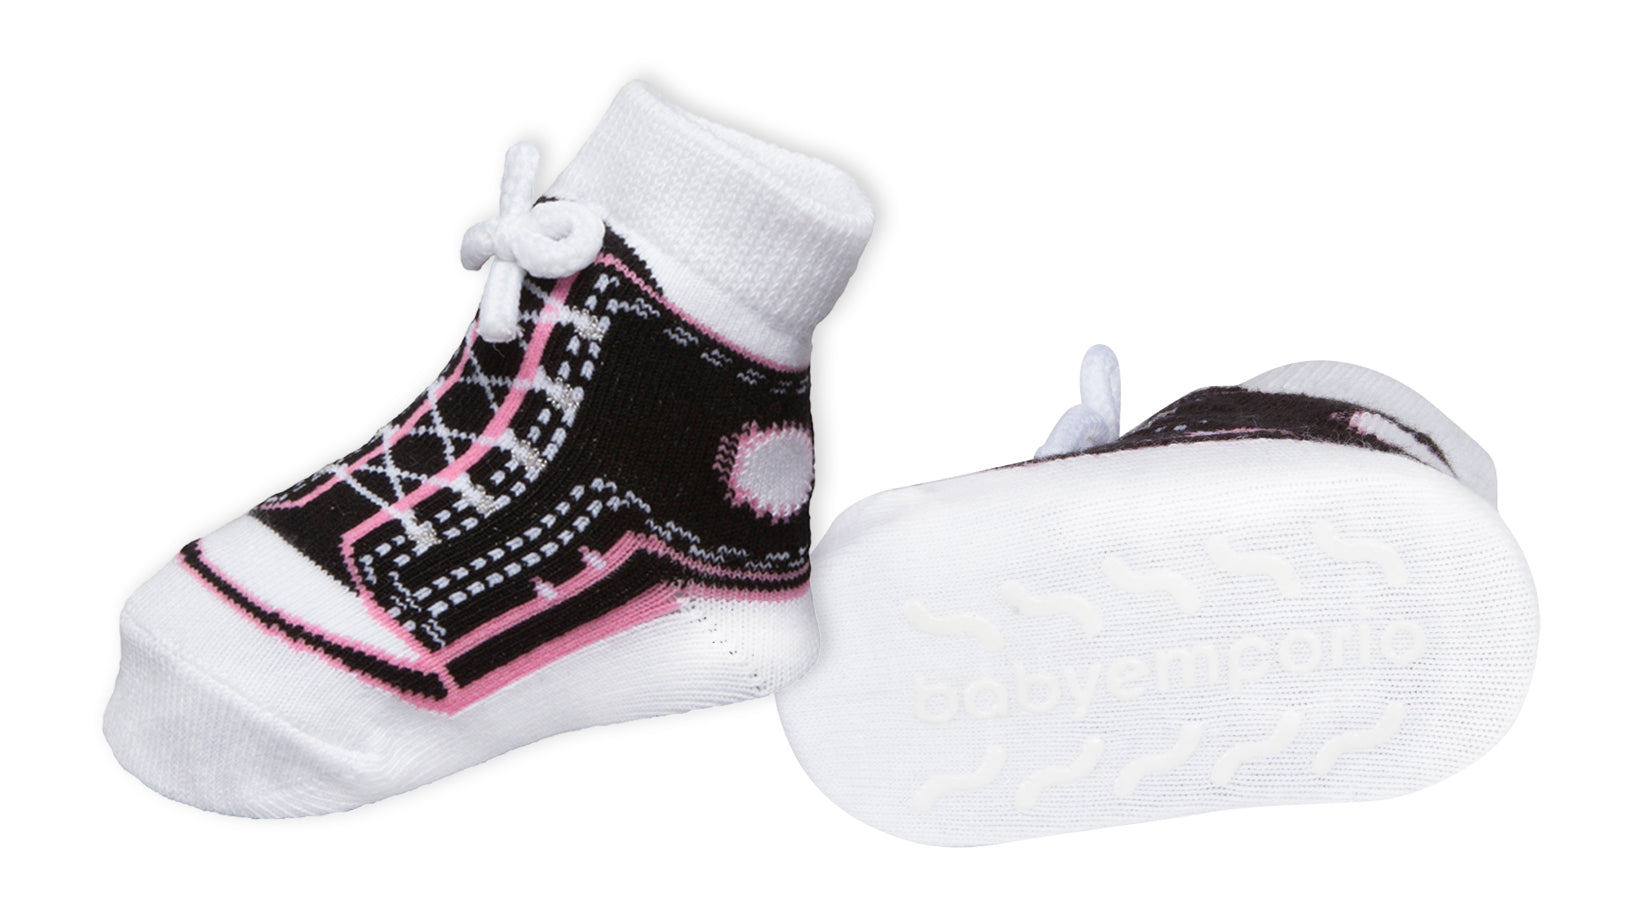 Baby Emporio infant girl baby sneaker socks with nearly invisible anti-slip soles matching the socks white sole color